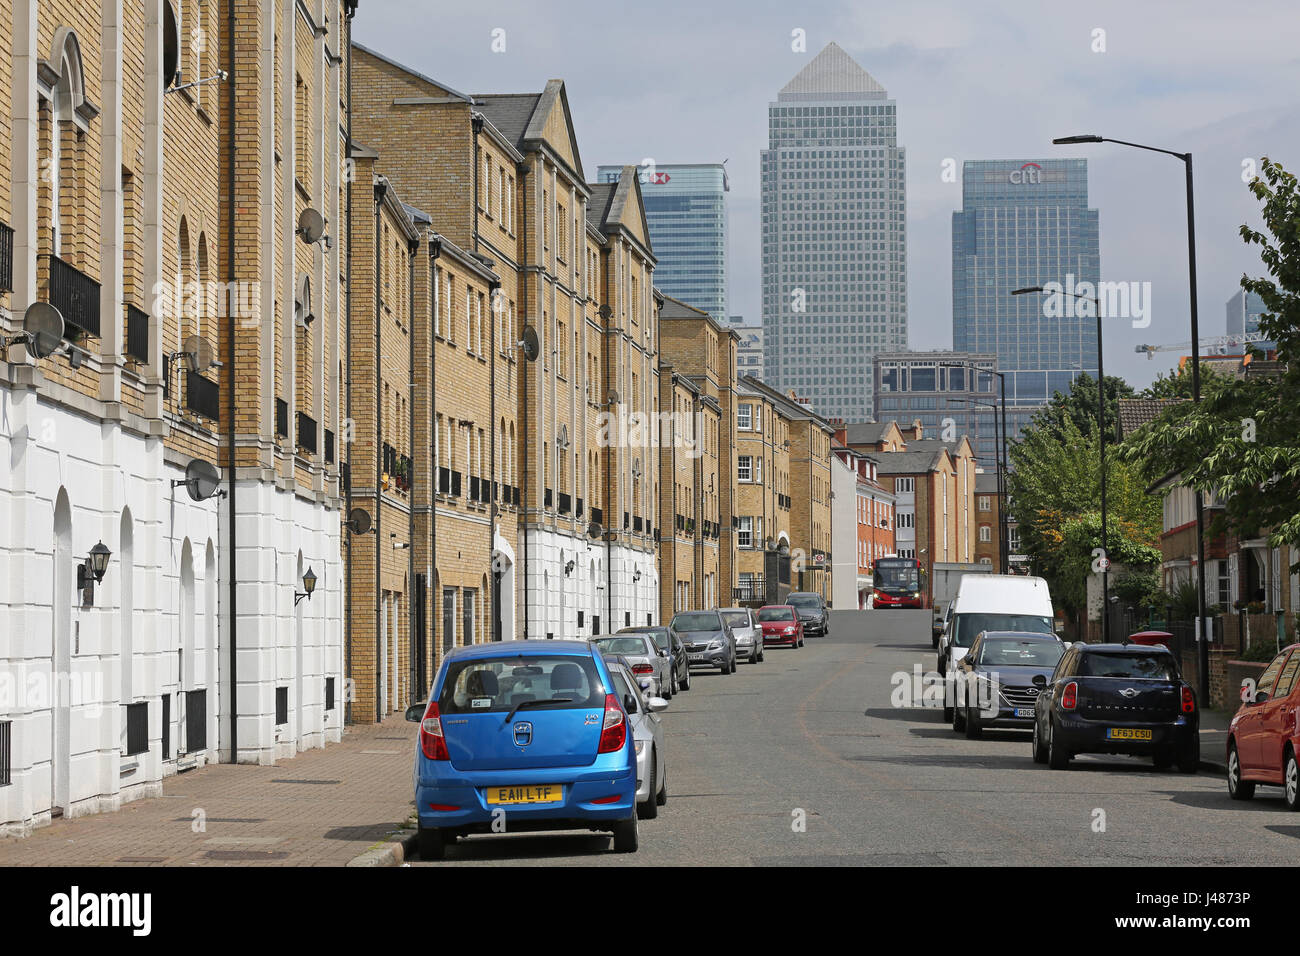 View along Rotherhithe Street in Southeast London, a residential street with the towers of Canary Wharf in the background. Shows single decker bus. Stock Photo